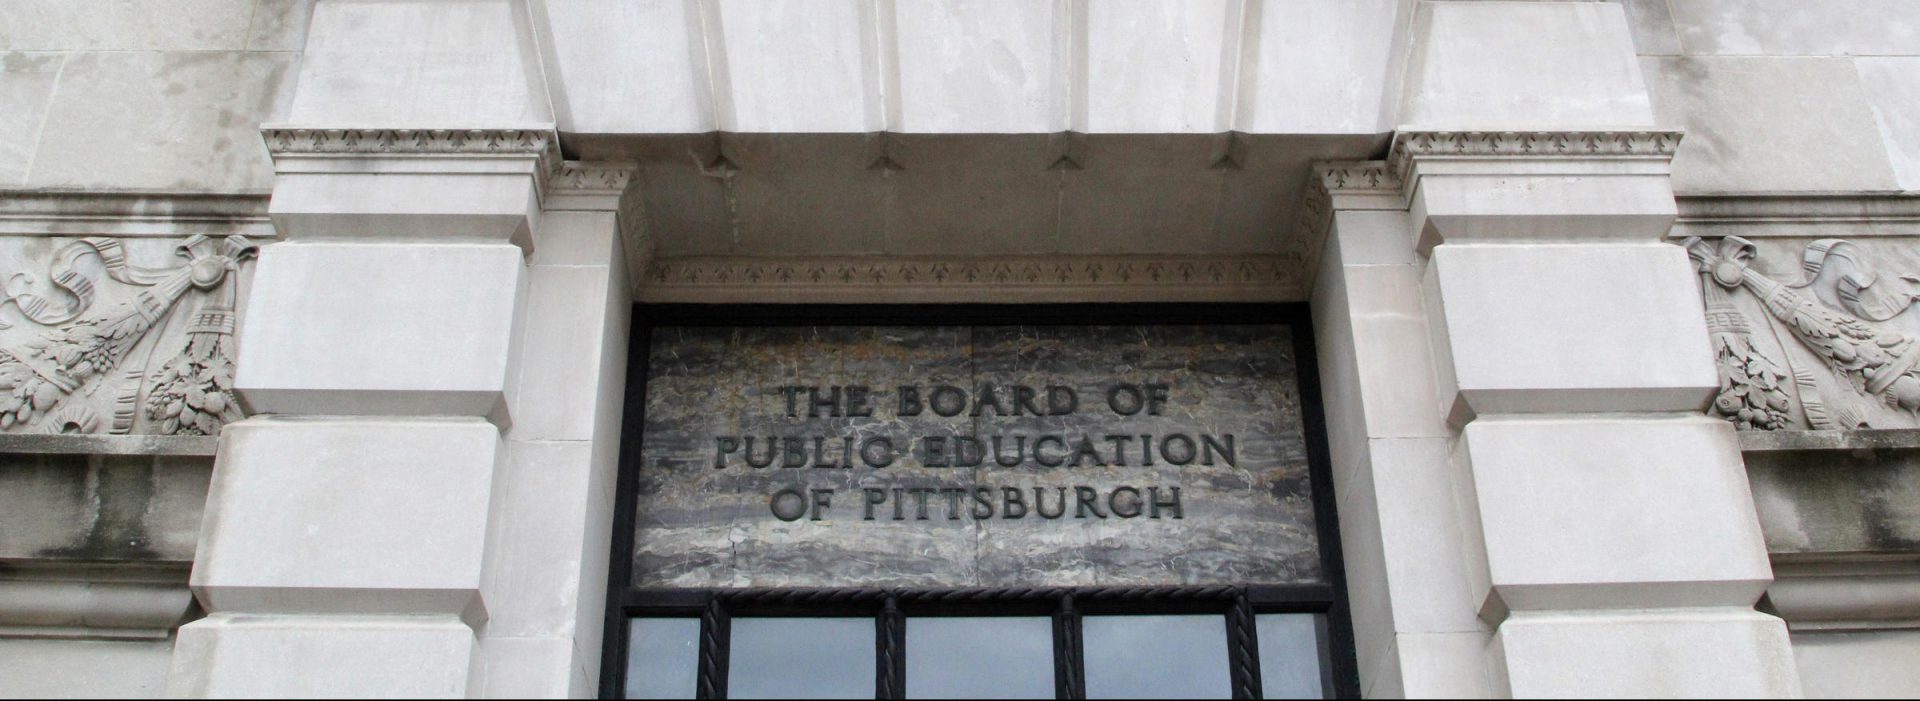 The Pittsburgh Public Schools district office is seen in this file photo.